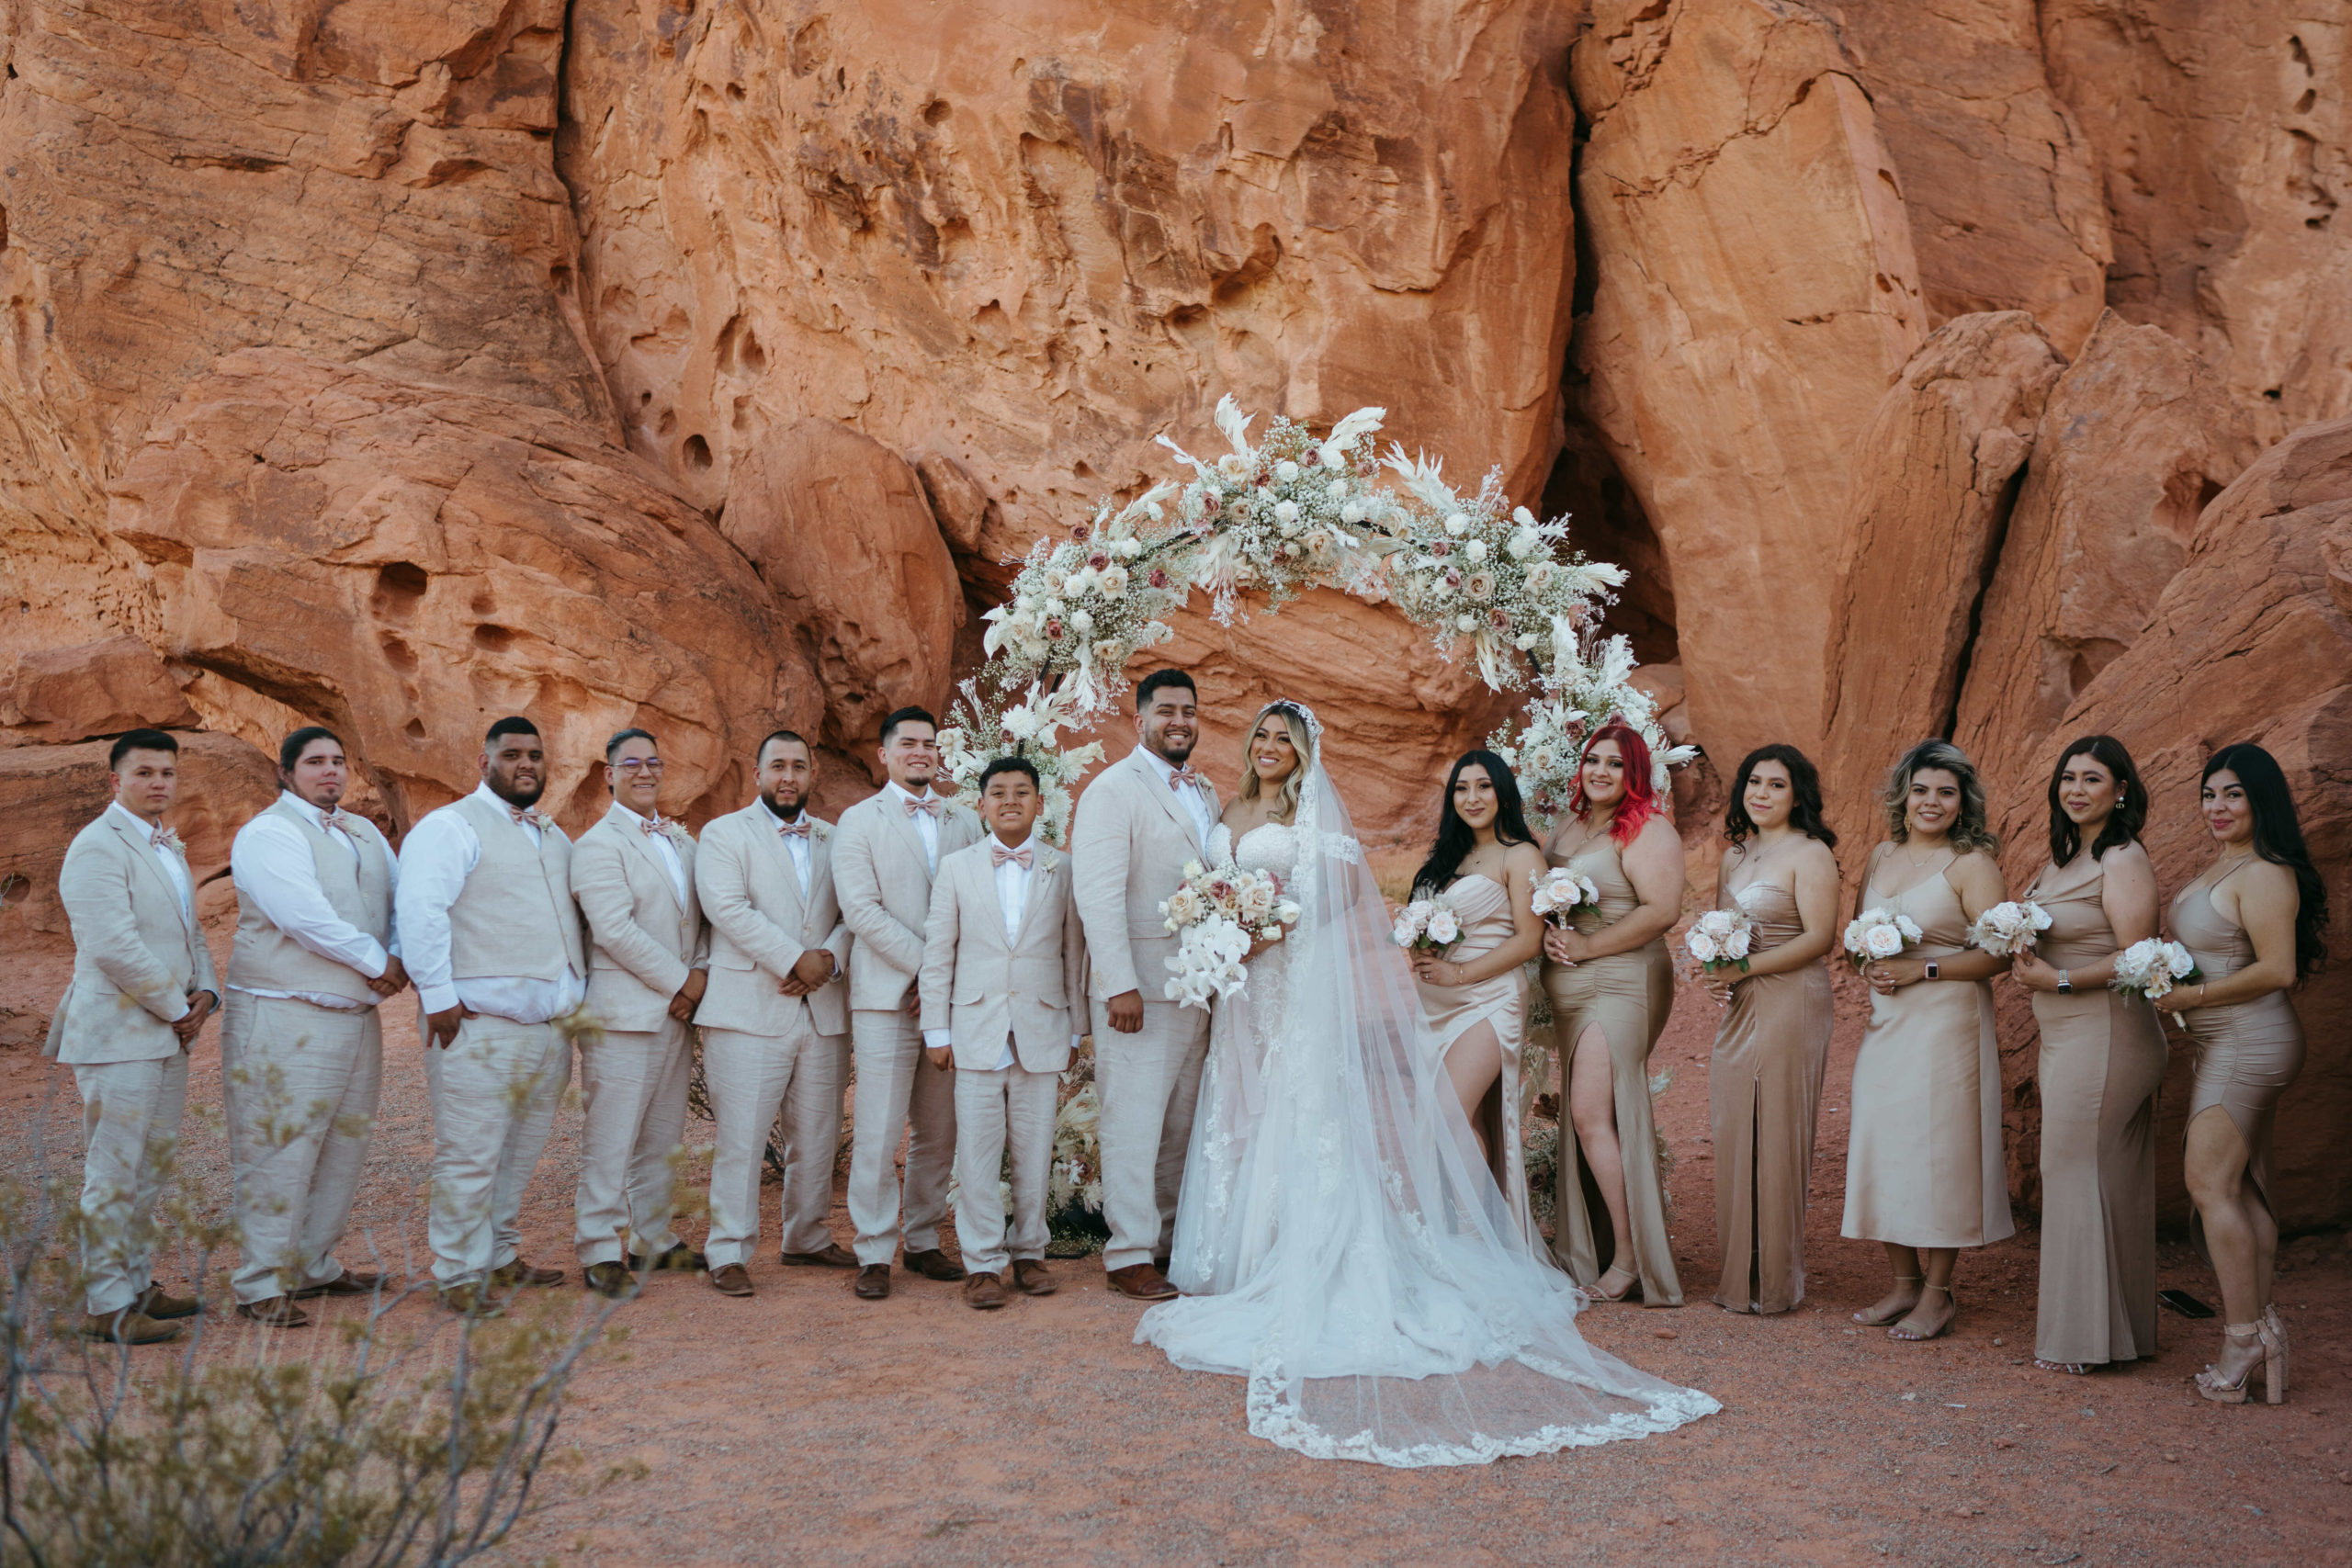 Modern Monochromatic Desert Micro-Wedding. Bride and groom stand at the circular floral covered altar with wedding party